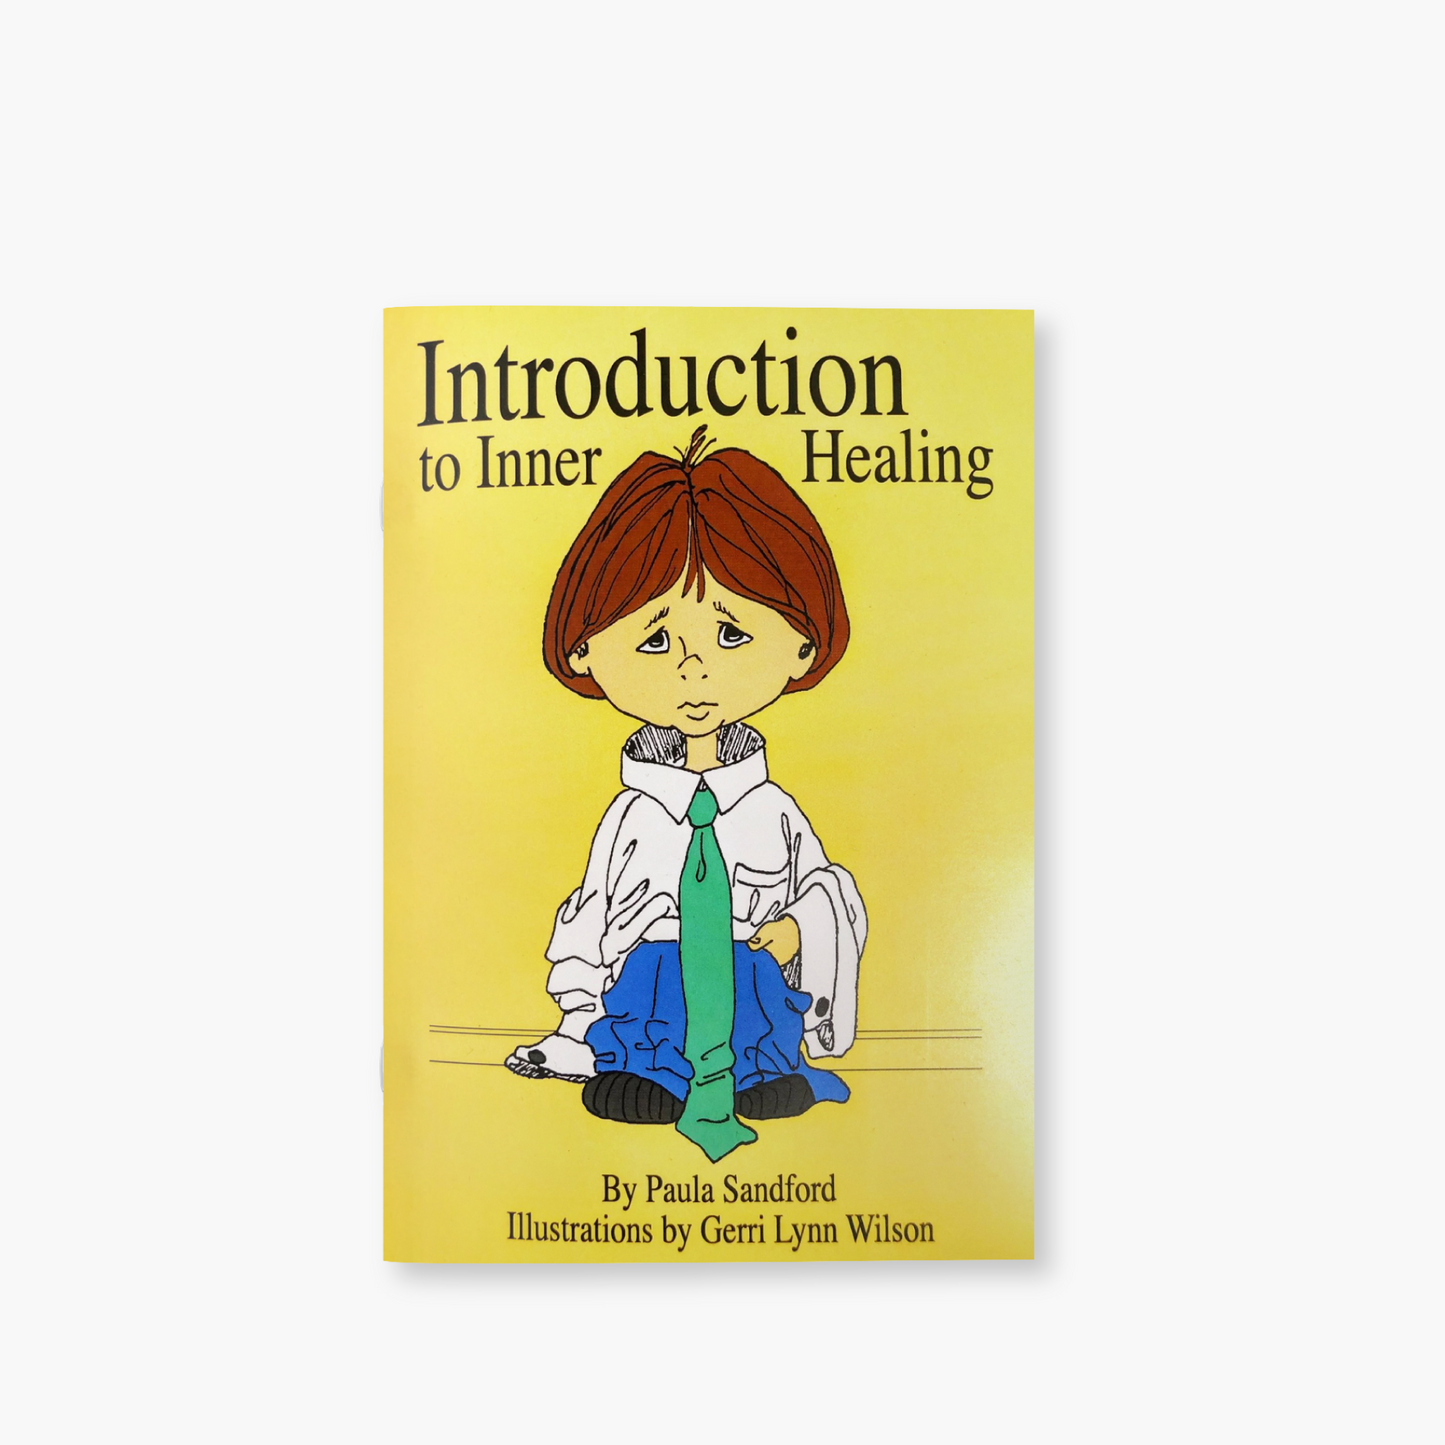 Introduction to Inner Healing